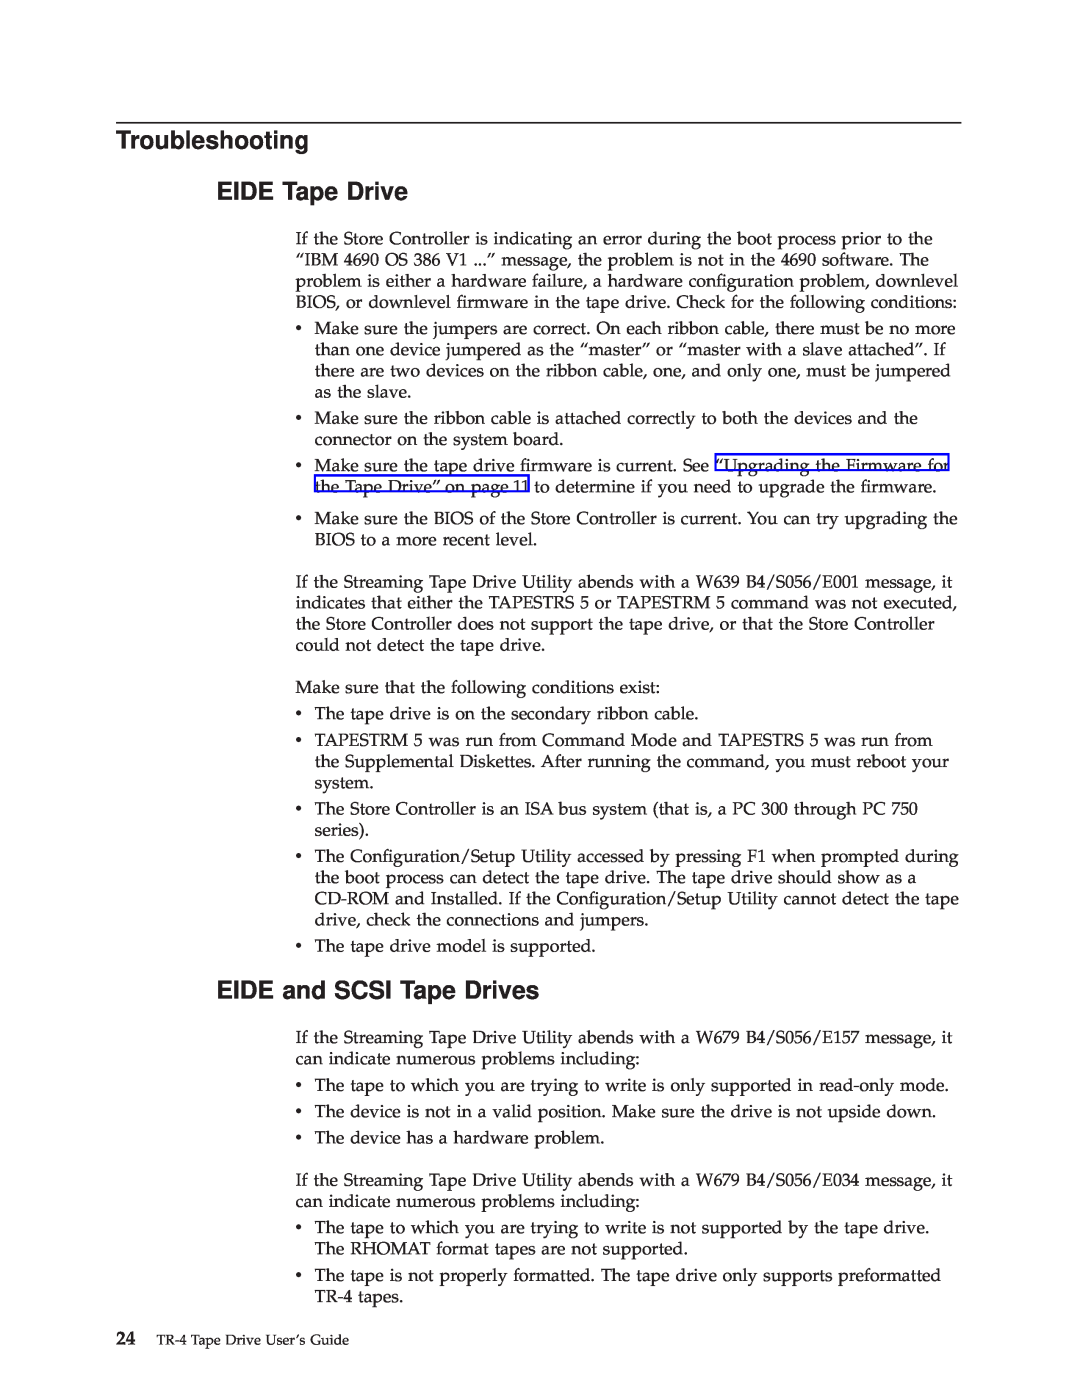 IBM 4690 manual Troubleshooting EIDE Tape Drive, EIDE and SCSI Tape Drives 